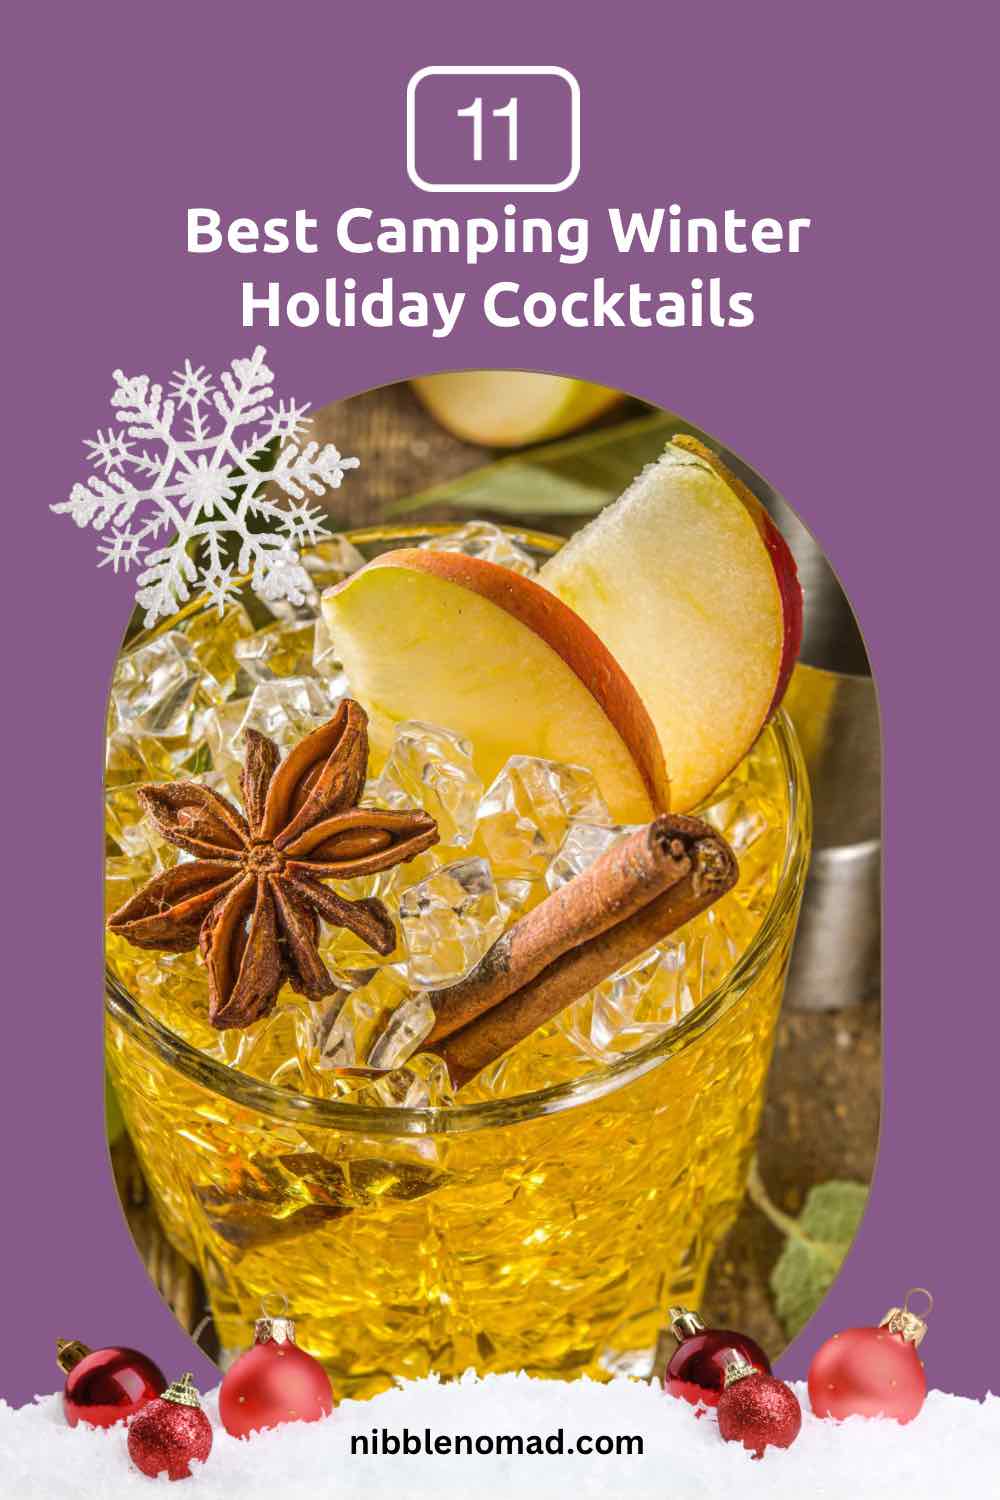 Best camping winter holiday cocktails